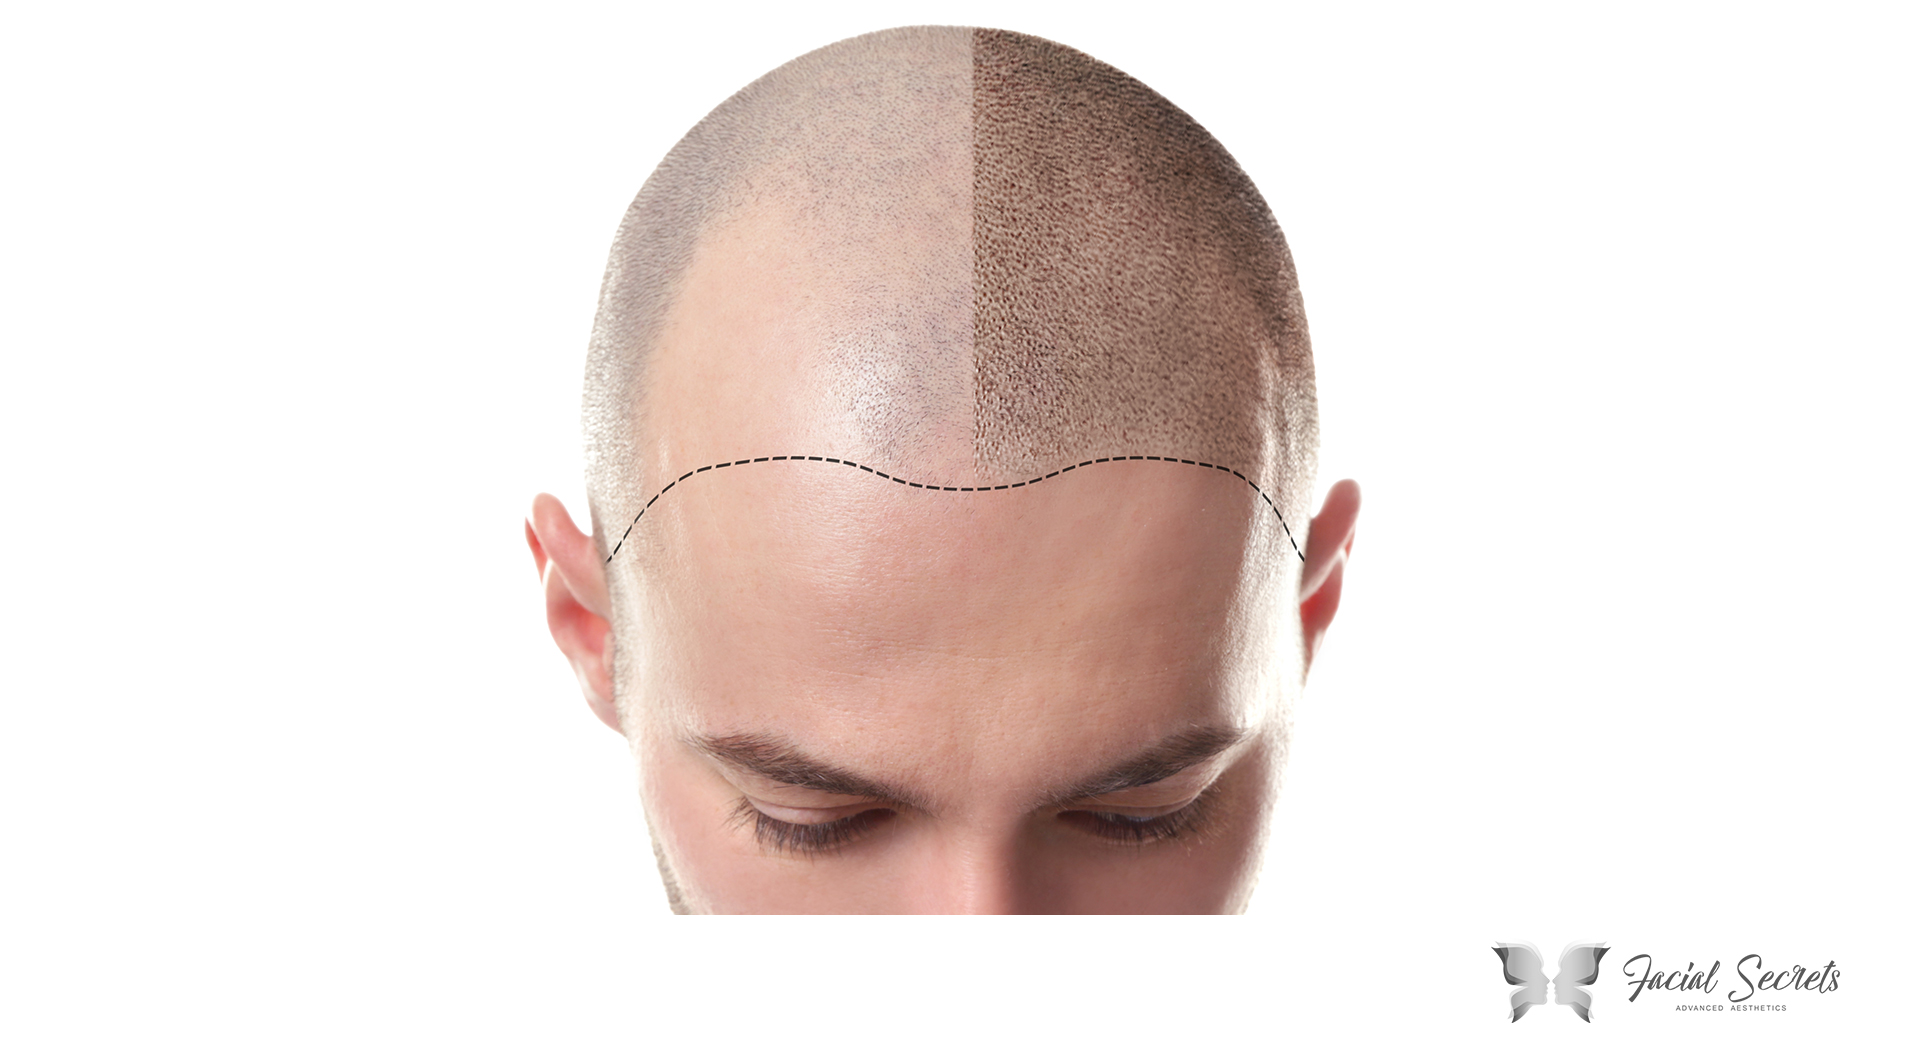 Male and female scalp micropigmentation treatments available Torbay